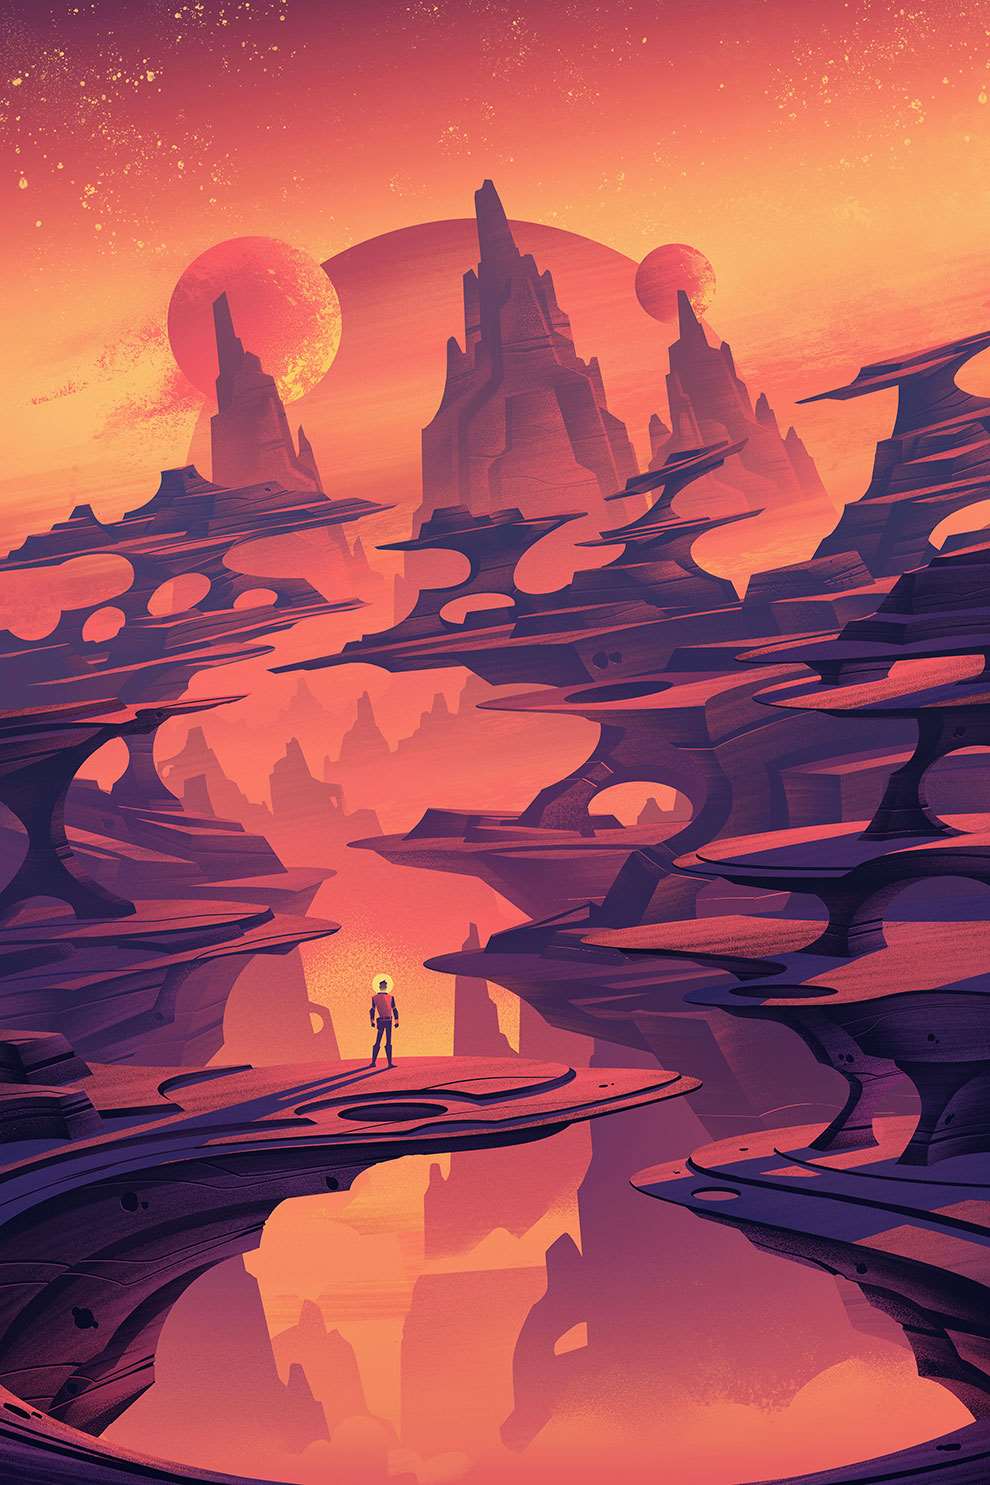 Brian Edward Miller, Digital detailed textural illustration of an alien red planet, with a main character standing on a rock. Sunset, bright rich red colour palette. Narrative.